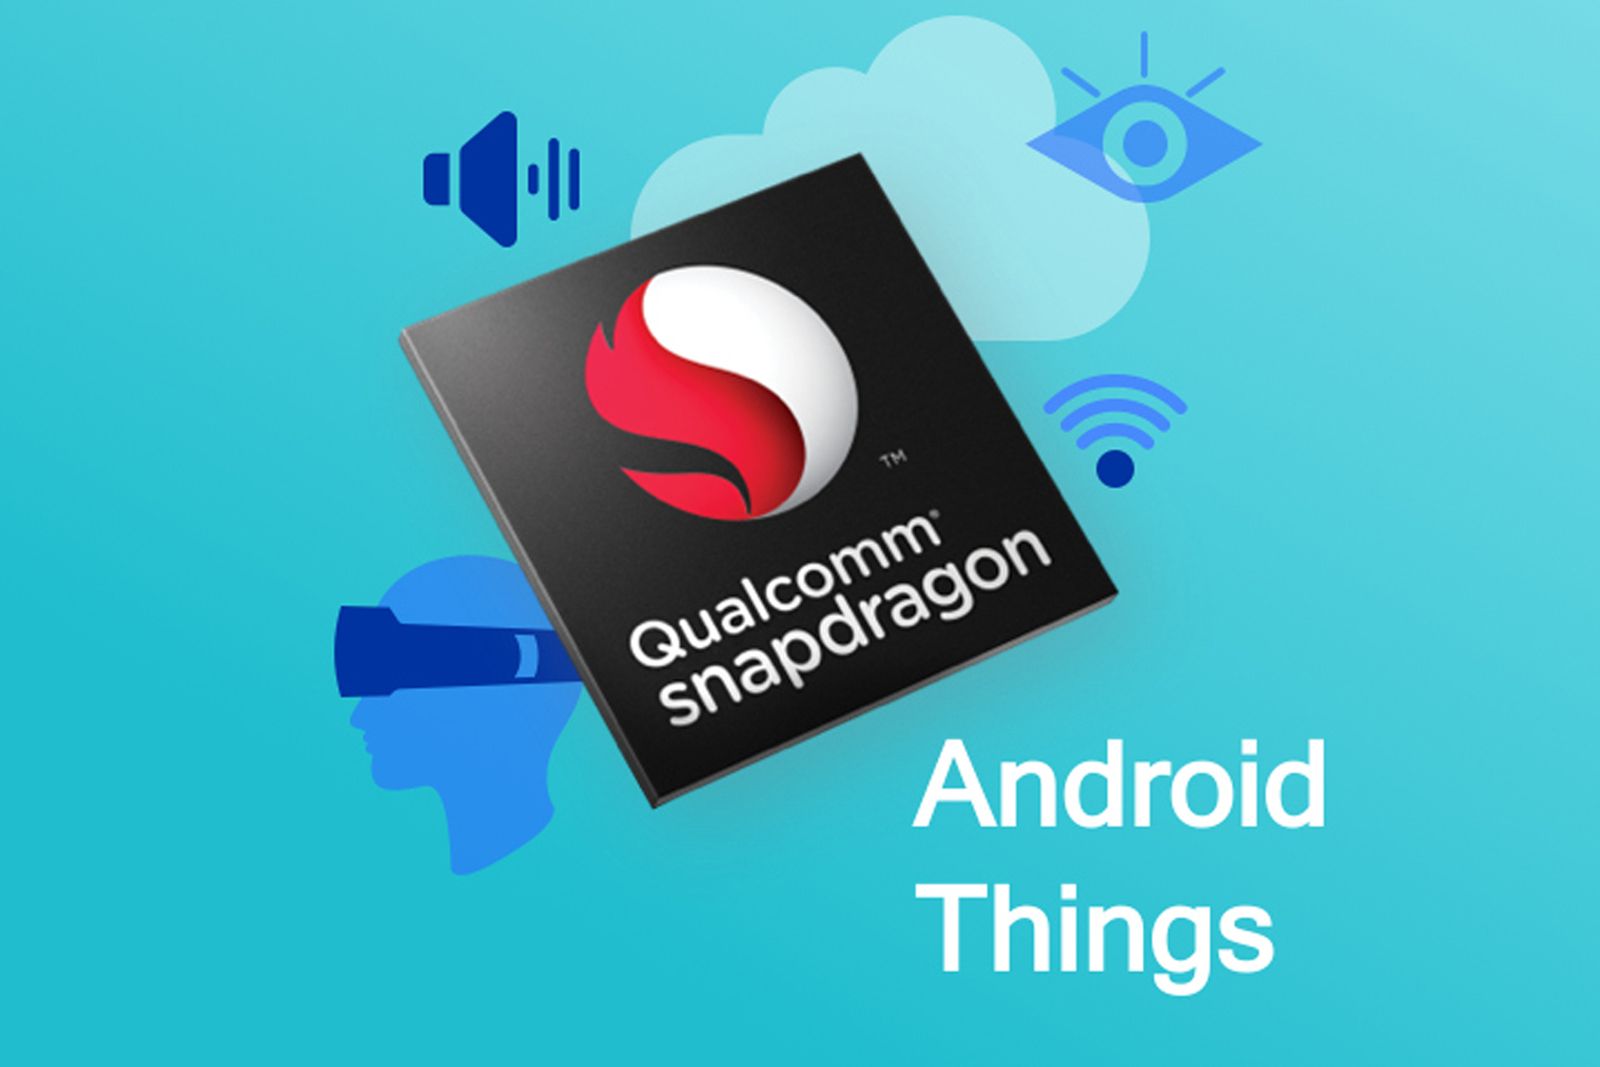 qualcomm snapdragon makes your android things devices more powerful better connected image 1